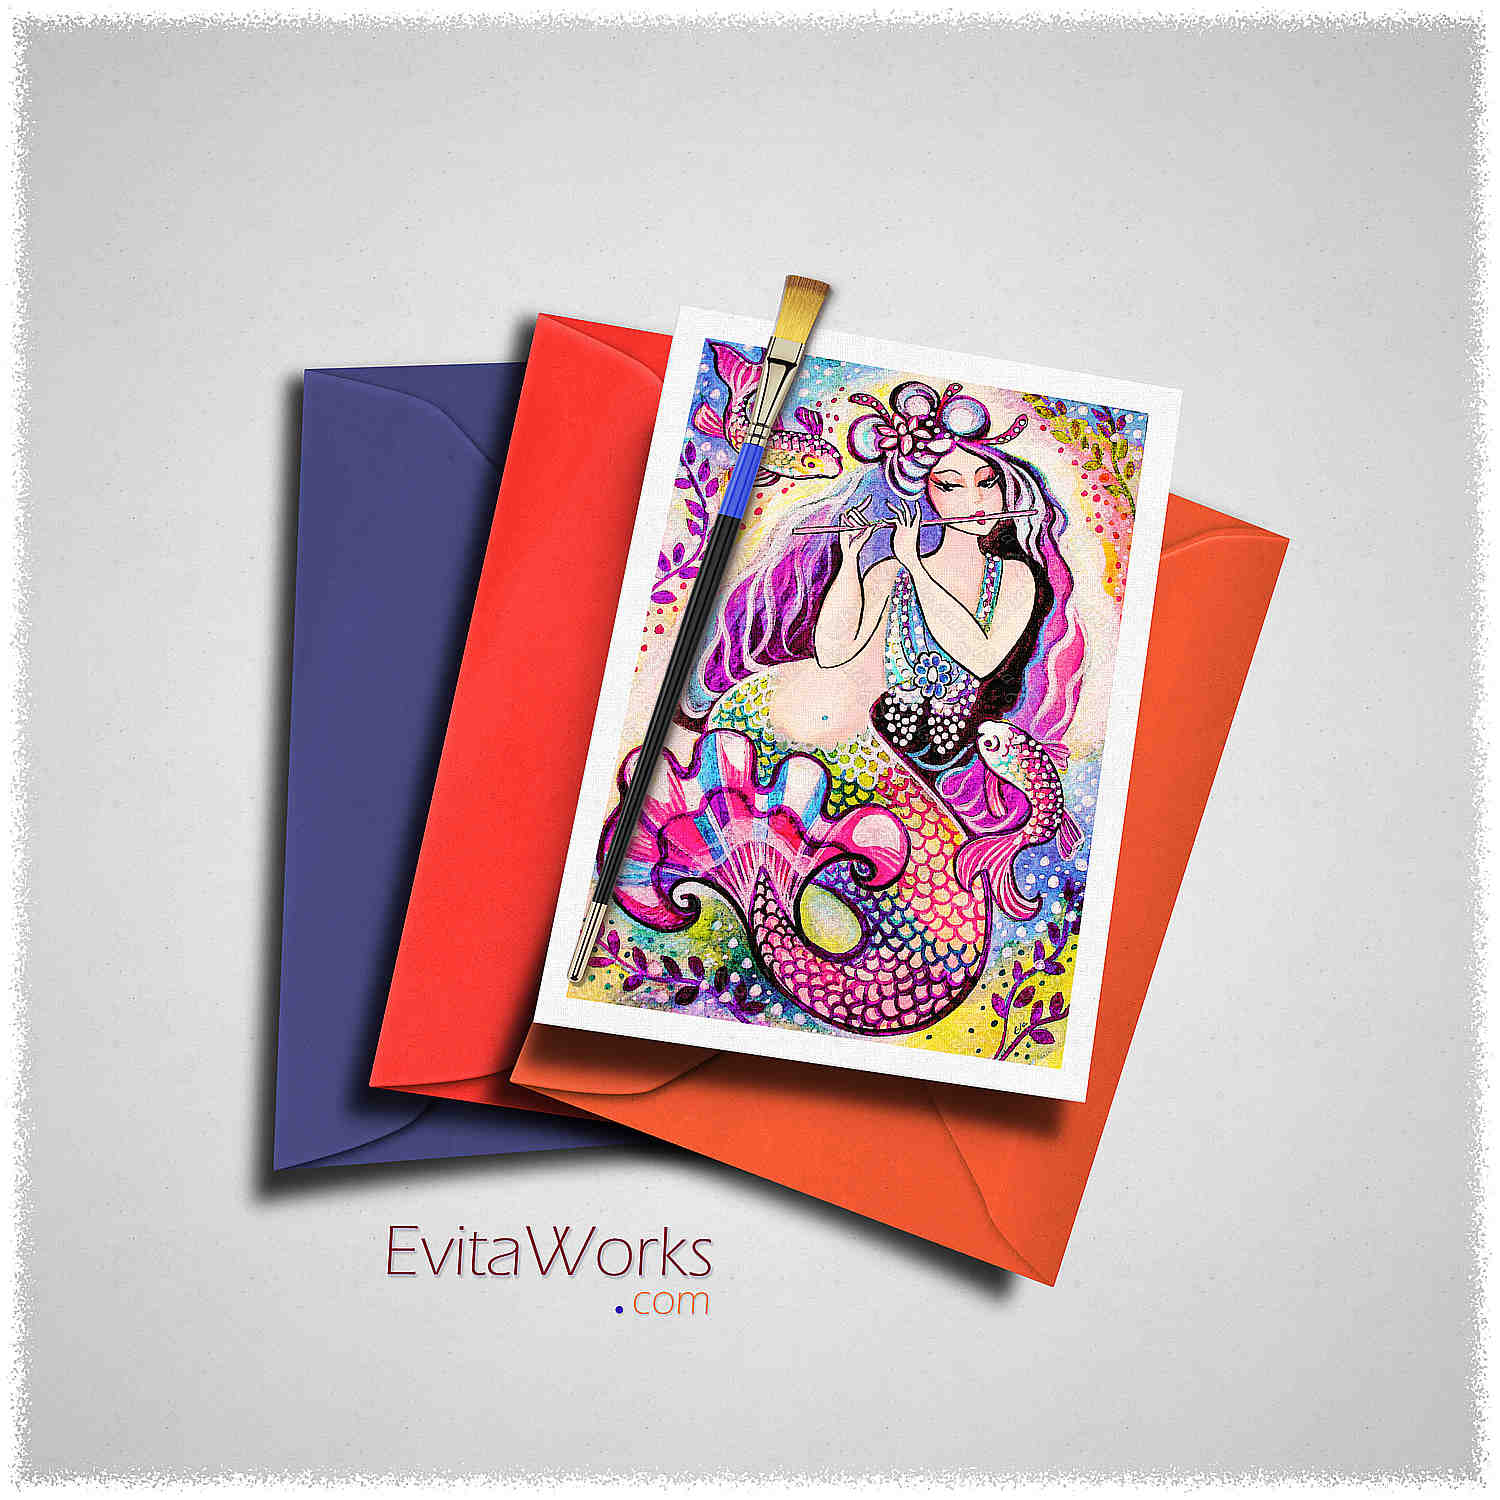 Hit to learn about "East Sea Mermaid, flute, koi fish" on cards